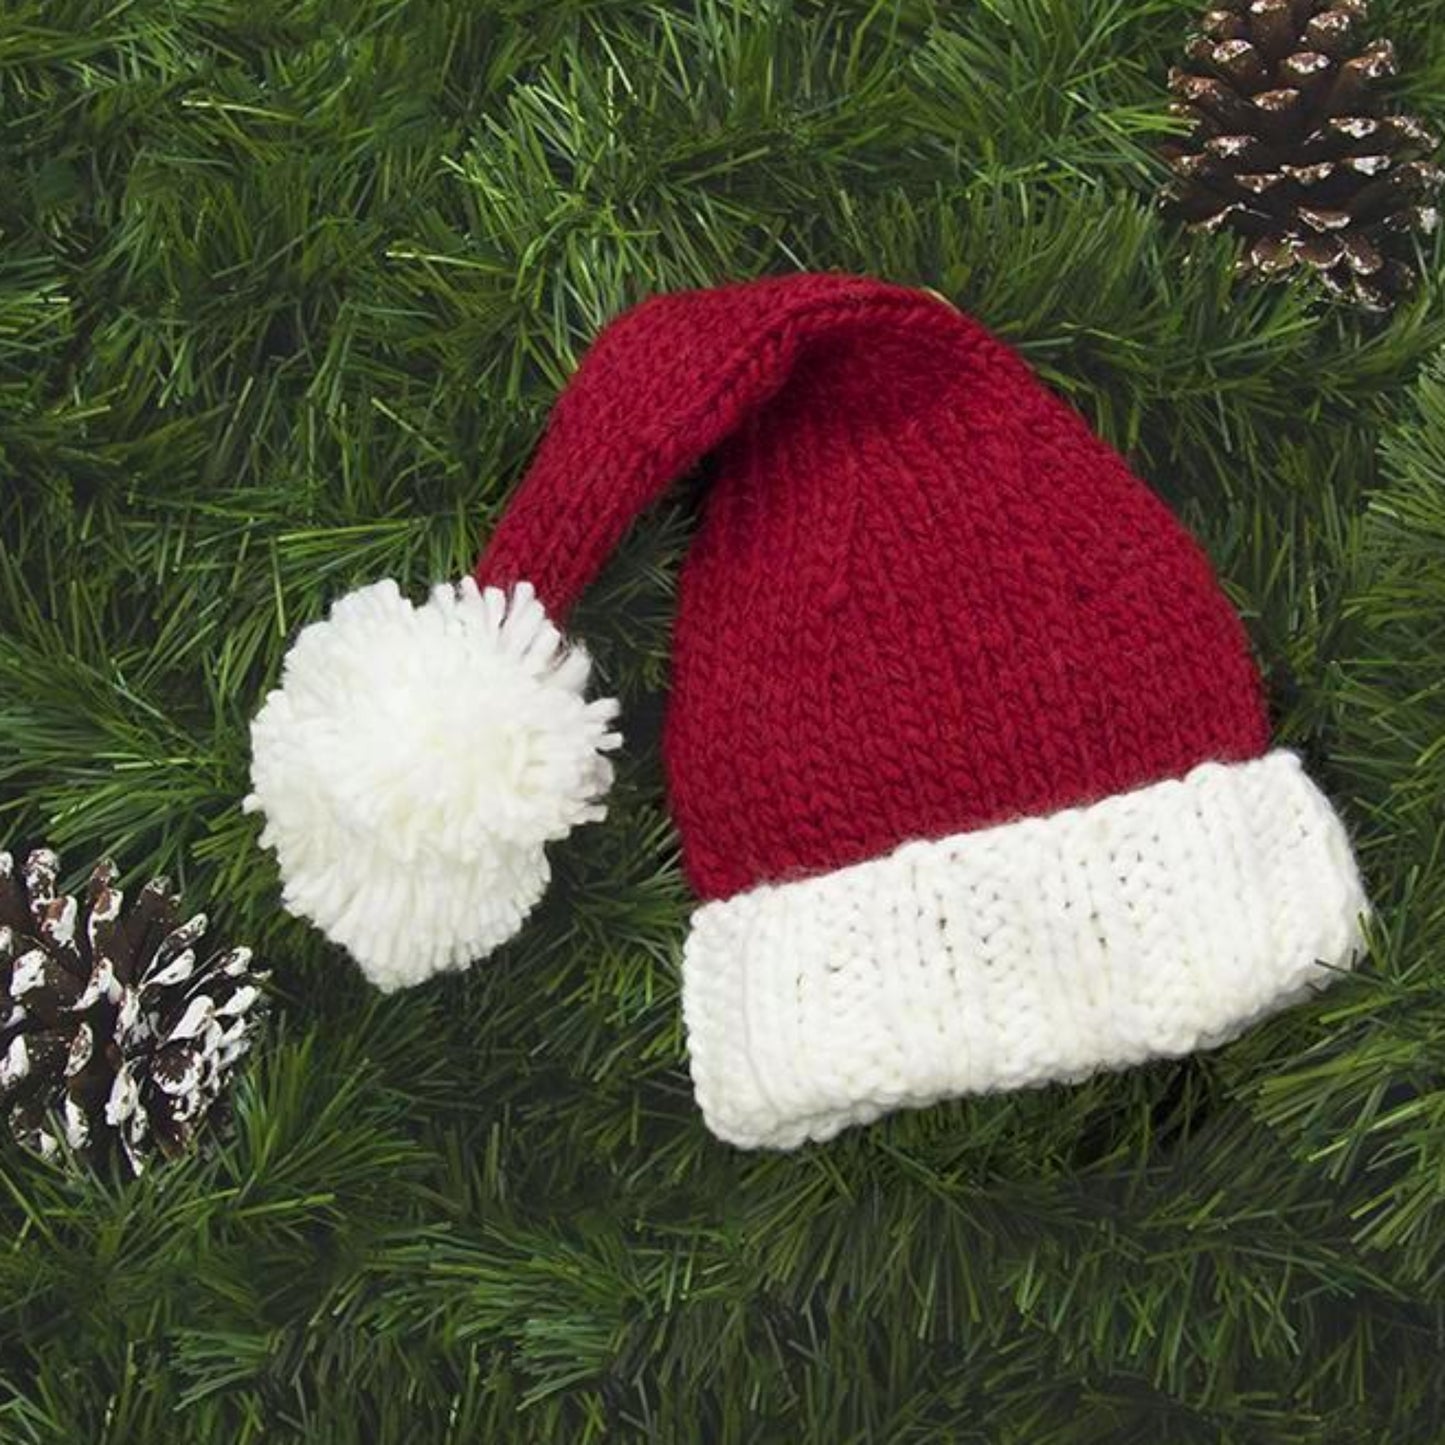 hand knit santa hat for baby and child in red and white